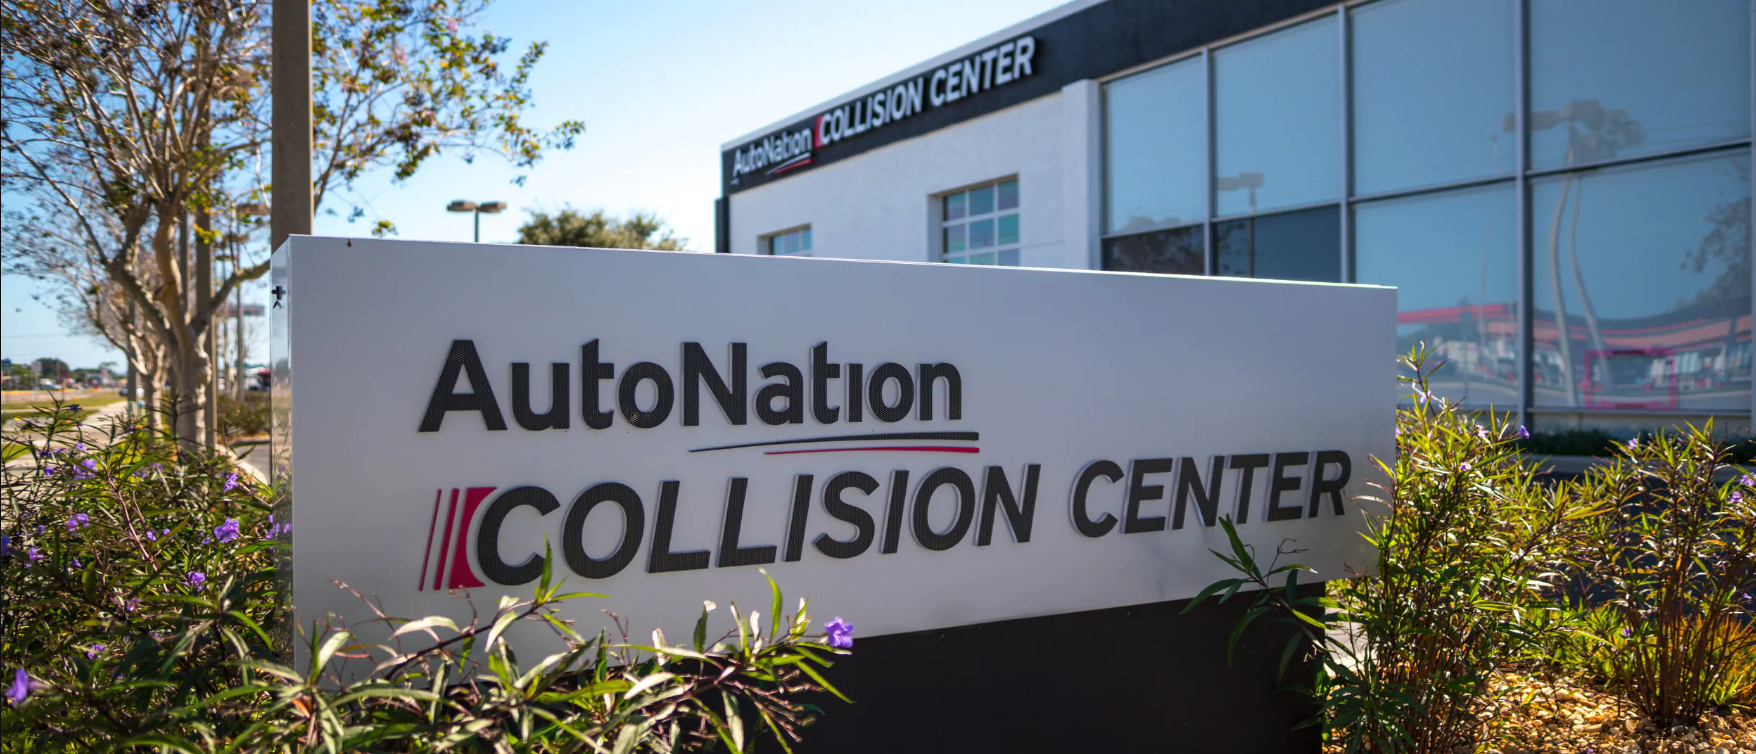 AutoNation Chevrolet South Clearwater Collision Center